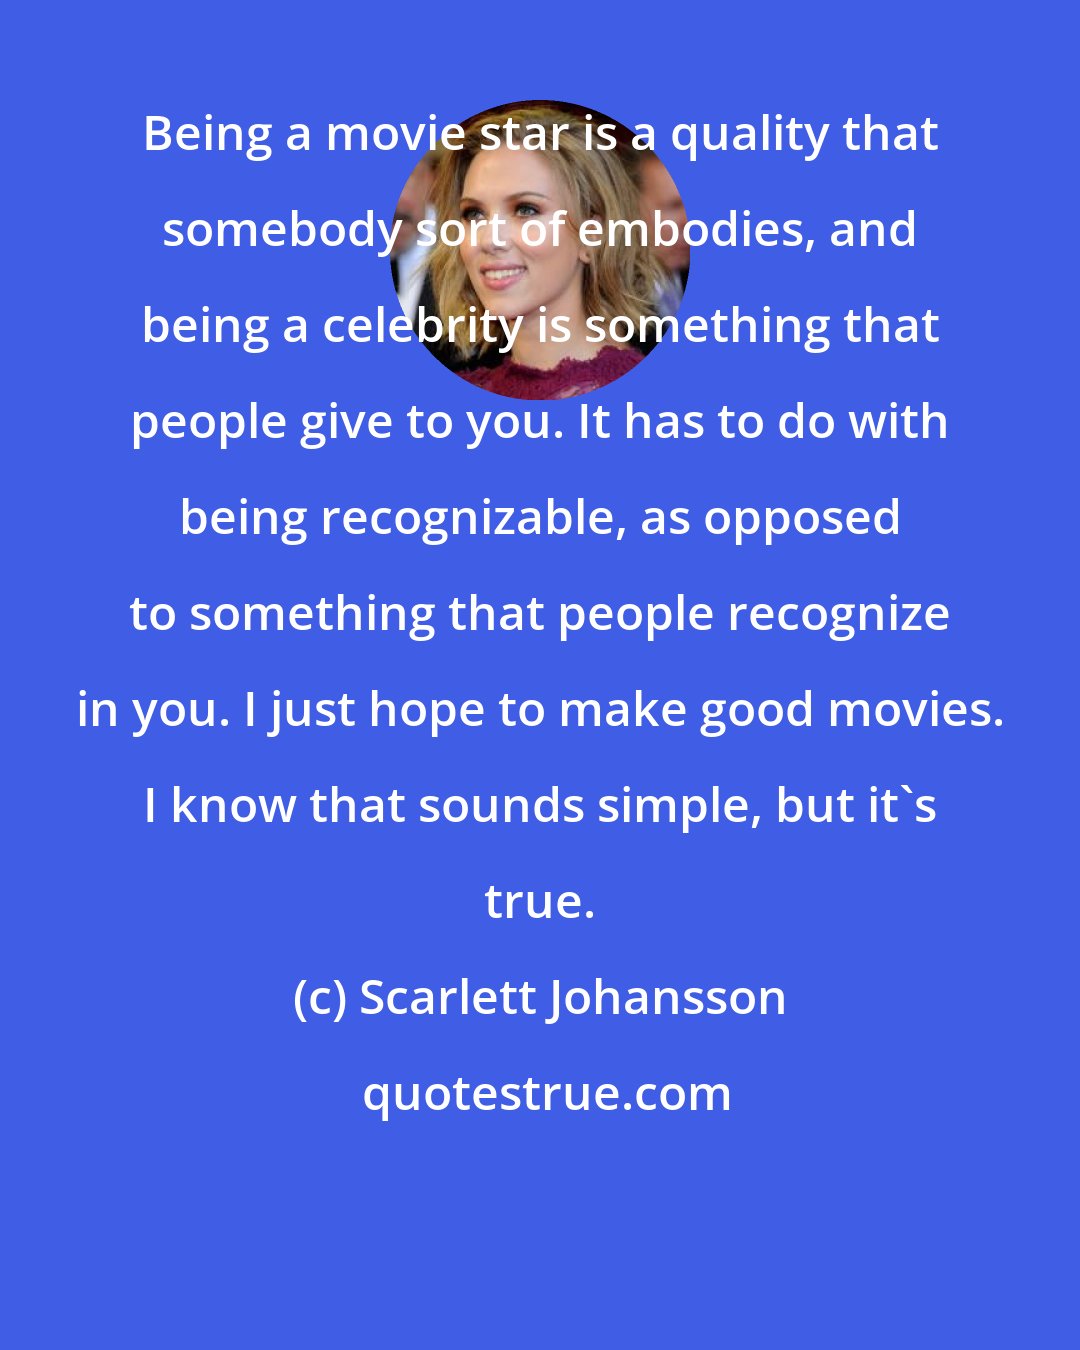 Scarlett Johansson: Being a movie star is a quality that somebody sort of embodies, and being a celebrity is something that people give to you. It has to do with being recognizable, as opposed to something that people recognize in you. I just hope to make good movies. I know that sounds simple, but it's true.